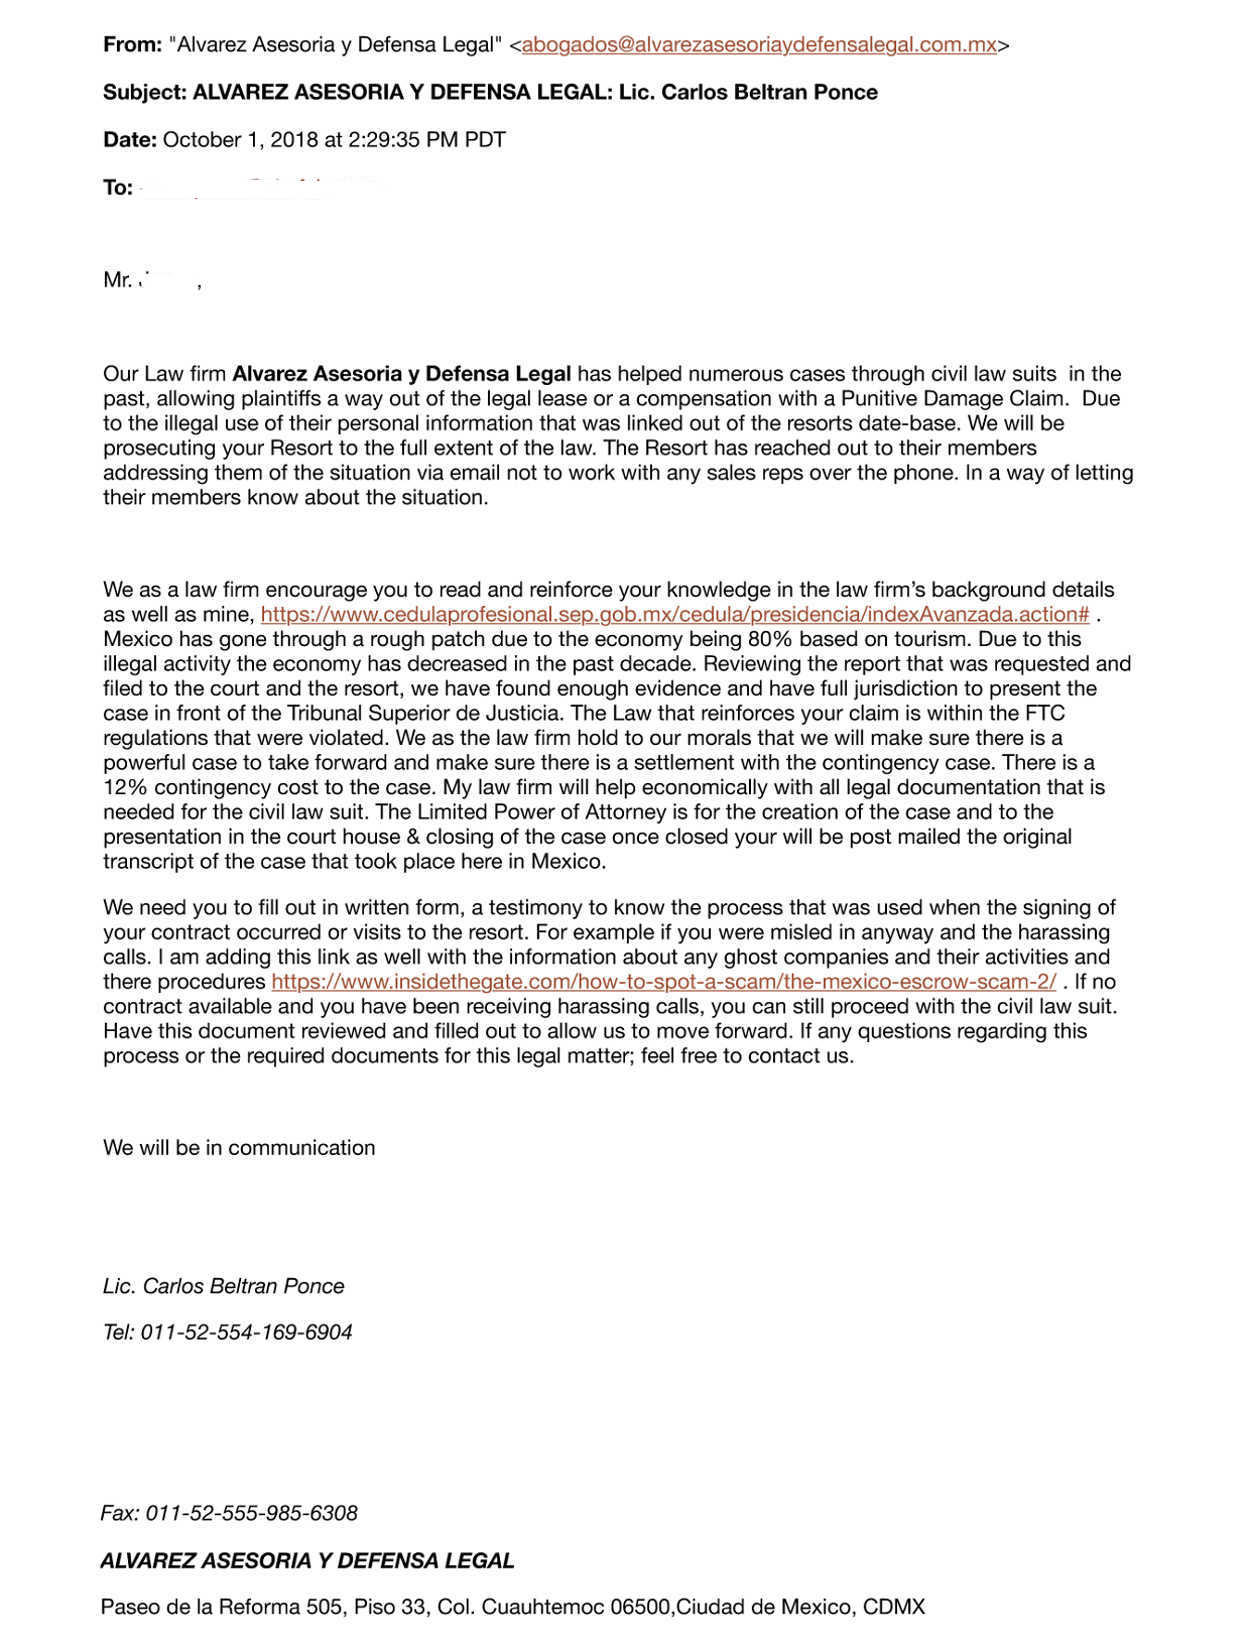 Letter from the alleged attorney.  Tap the image to expand, tap your browser's back arrow to return to the page...